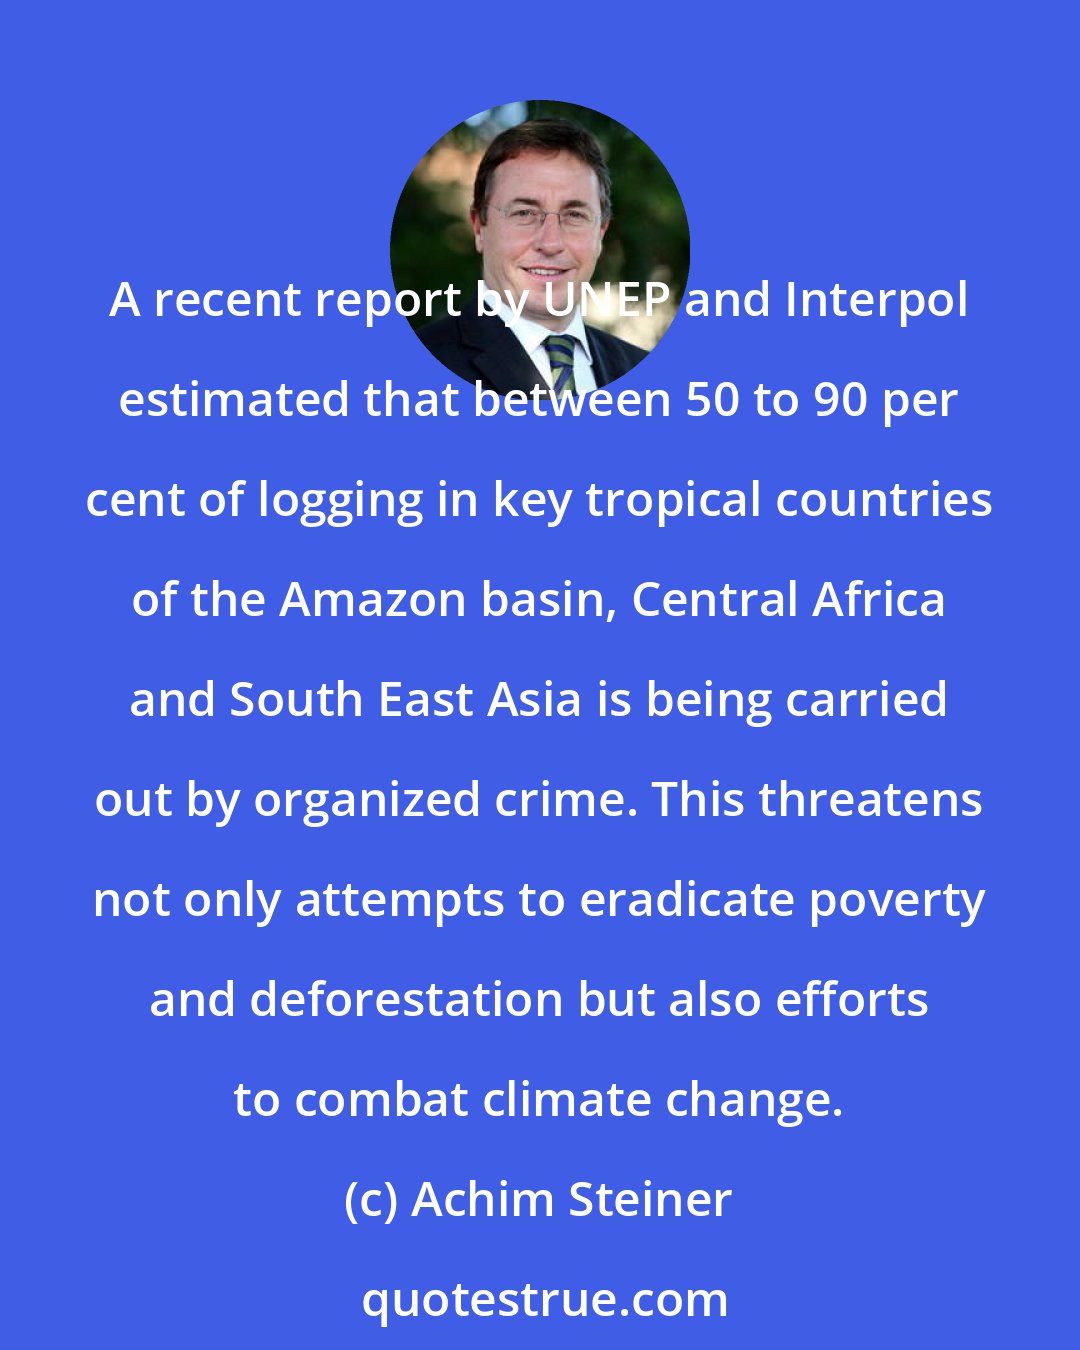 Achim Steiner: A recent report by UNEP and Interpol estimated that between 50 to 90 per cent of logging in key tropical countries of the Amazon basin, Central Africa and South East Asia is being carried out by organized crime. This threatens not only attempts to eradicate poverty and deforestation but also efforts to combat climate change.